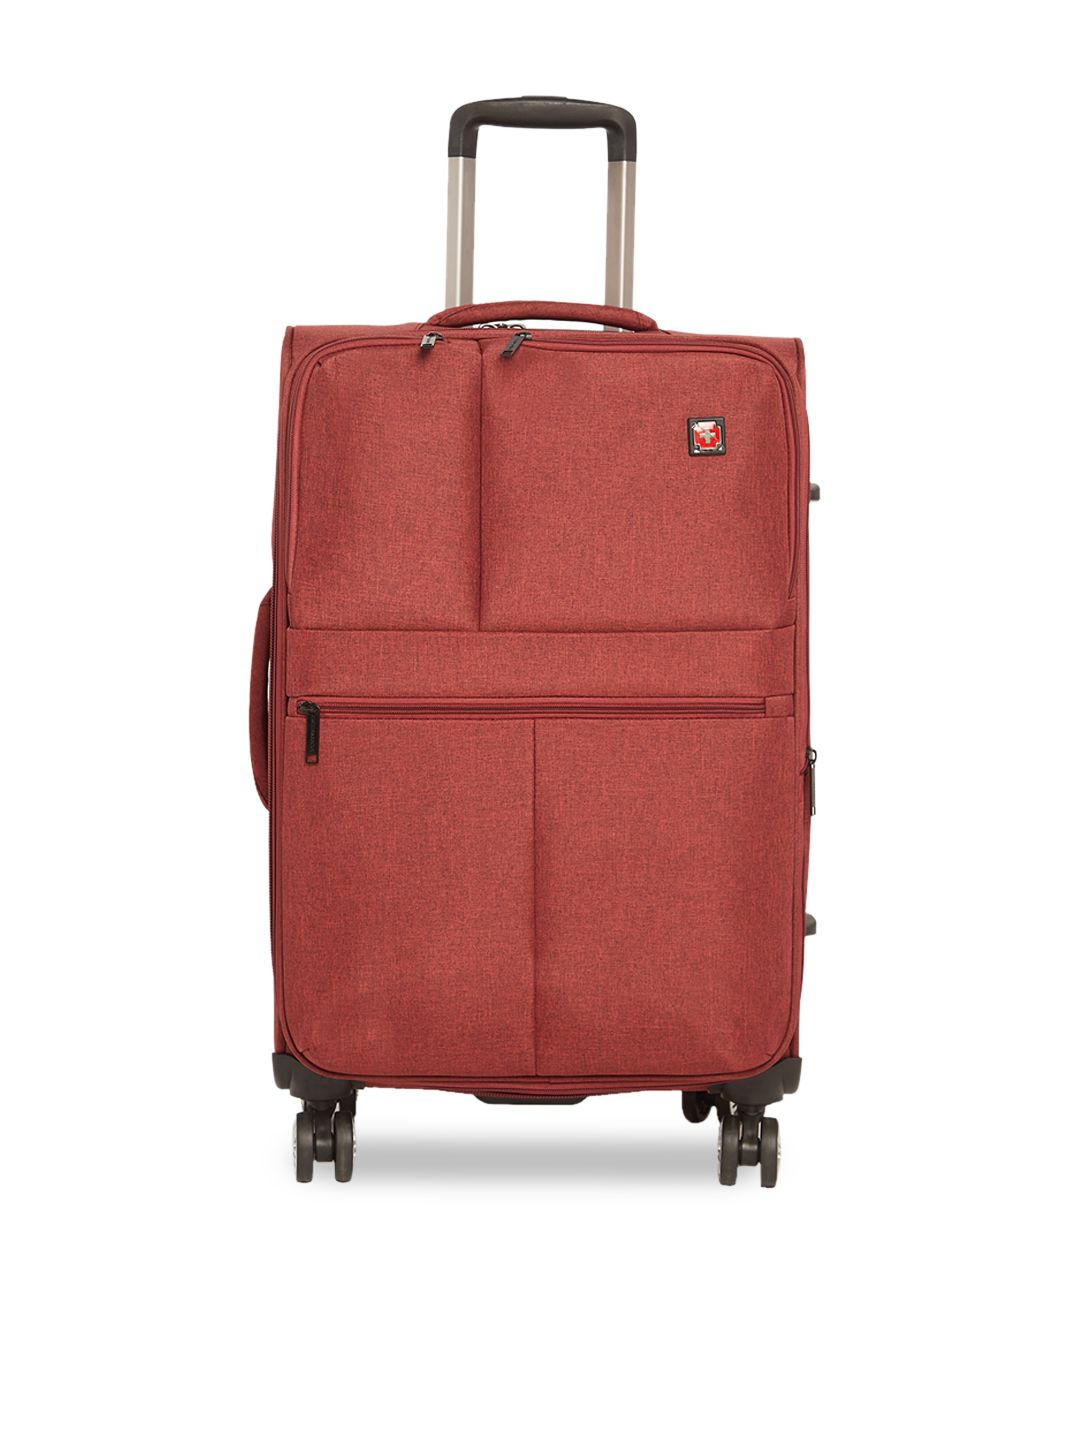 SWISS BRAND Rust-Coloured Solid Vevey Soft-Sided Medium Trolley Suitcase Price in India